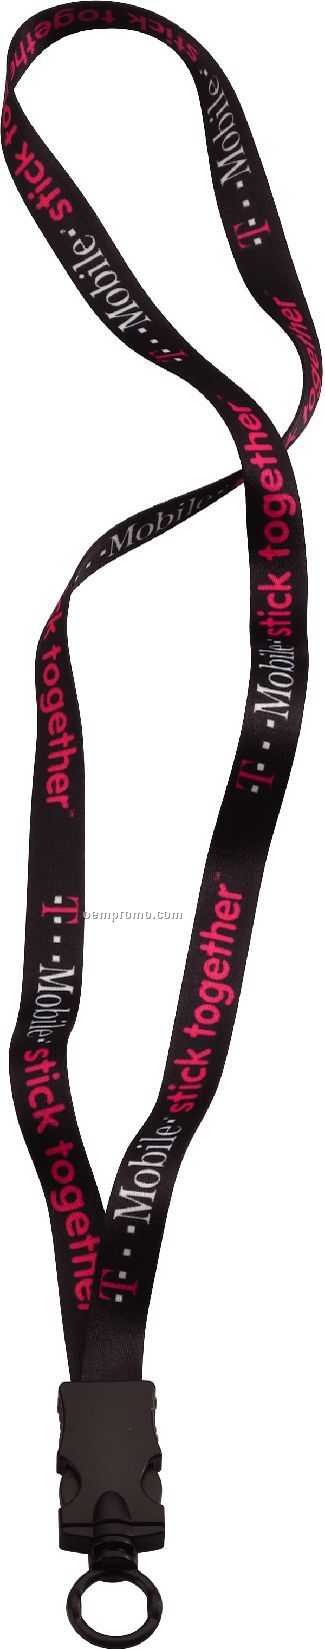 1/2" Rpet Dye Sublimated Lanyard W/ Plastic Snap Buckle Release & O-ring